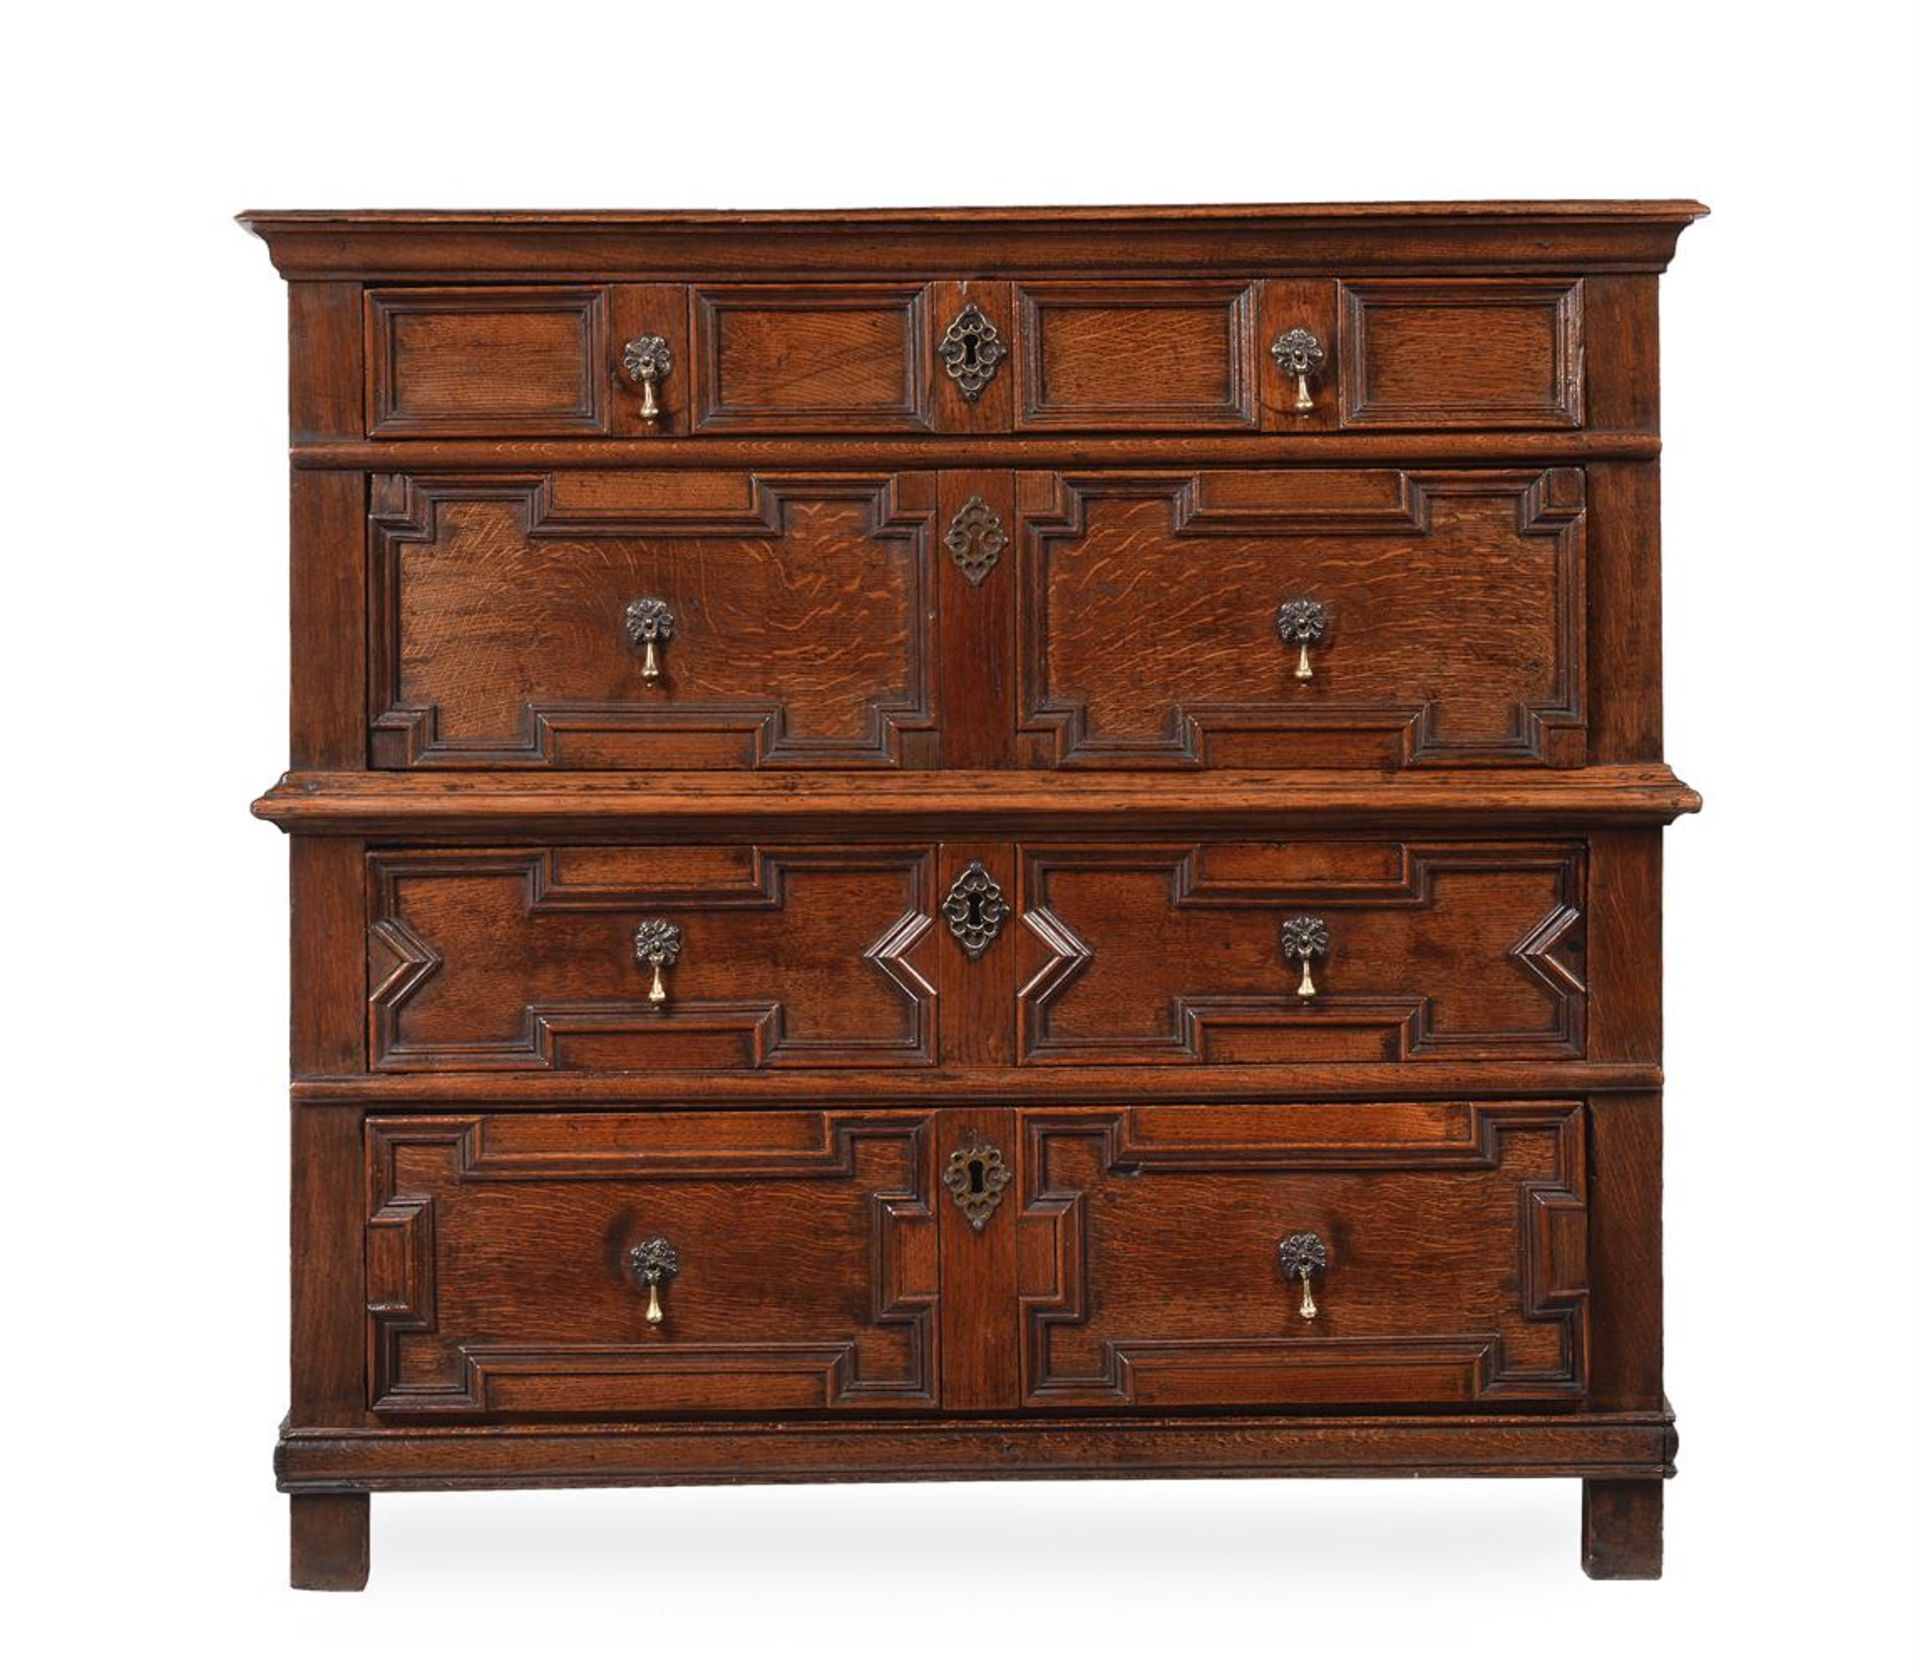 A CHARLES II OAK CHEST OF DRAWERS, LATE 17TH CENTURY - Image 2 of 4